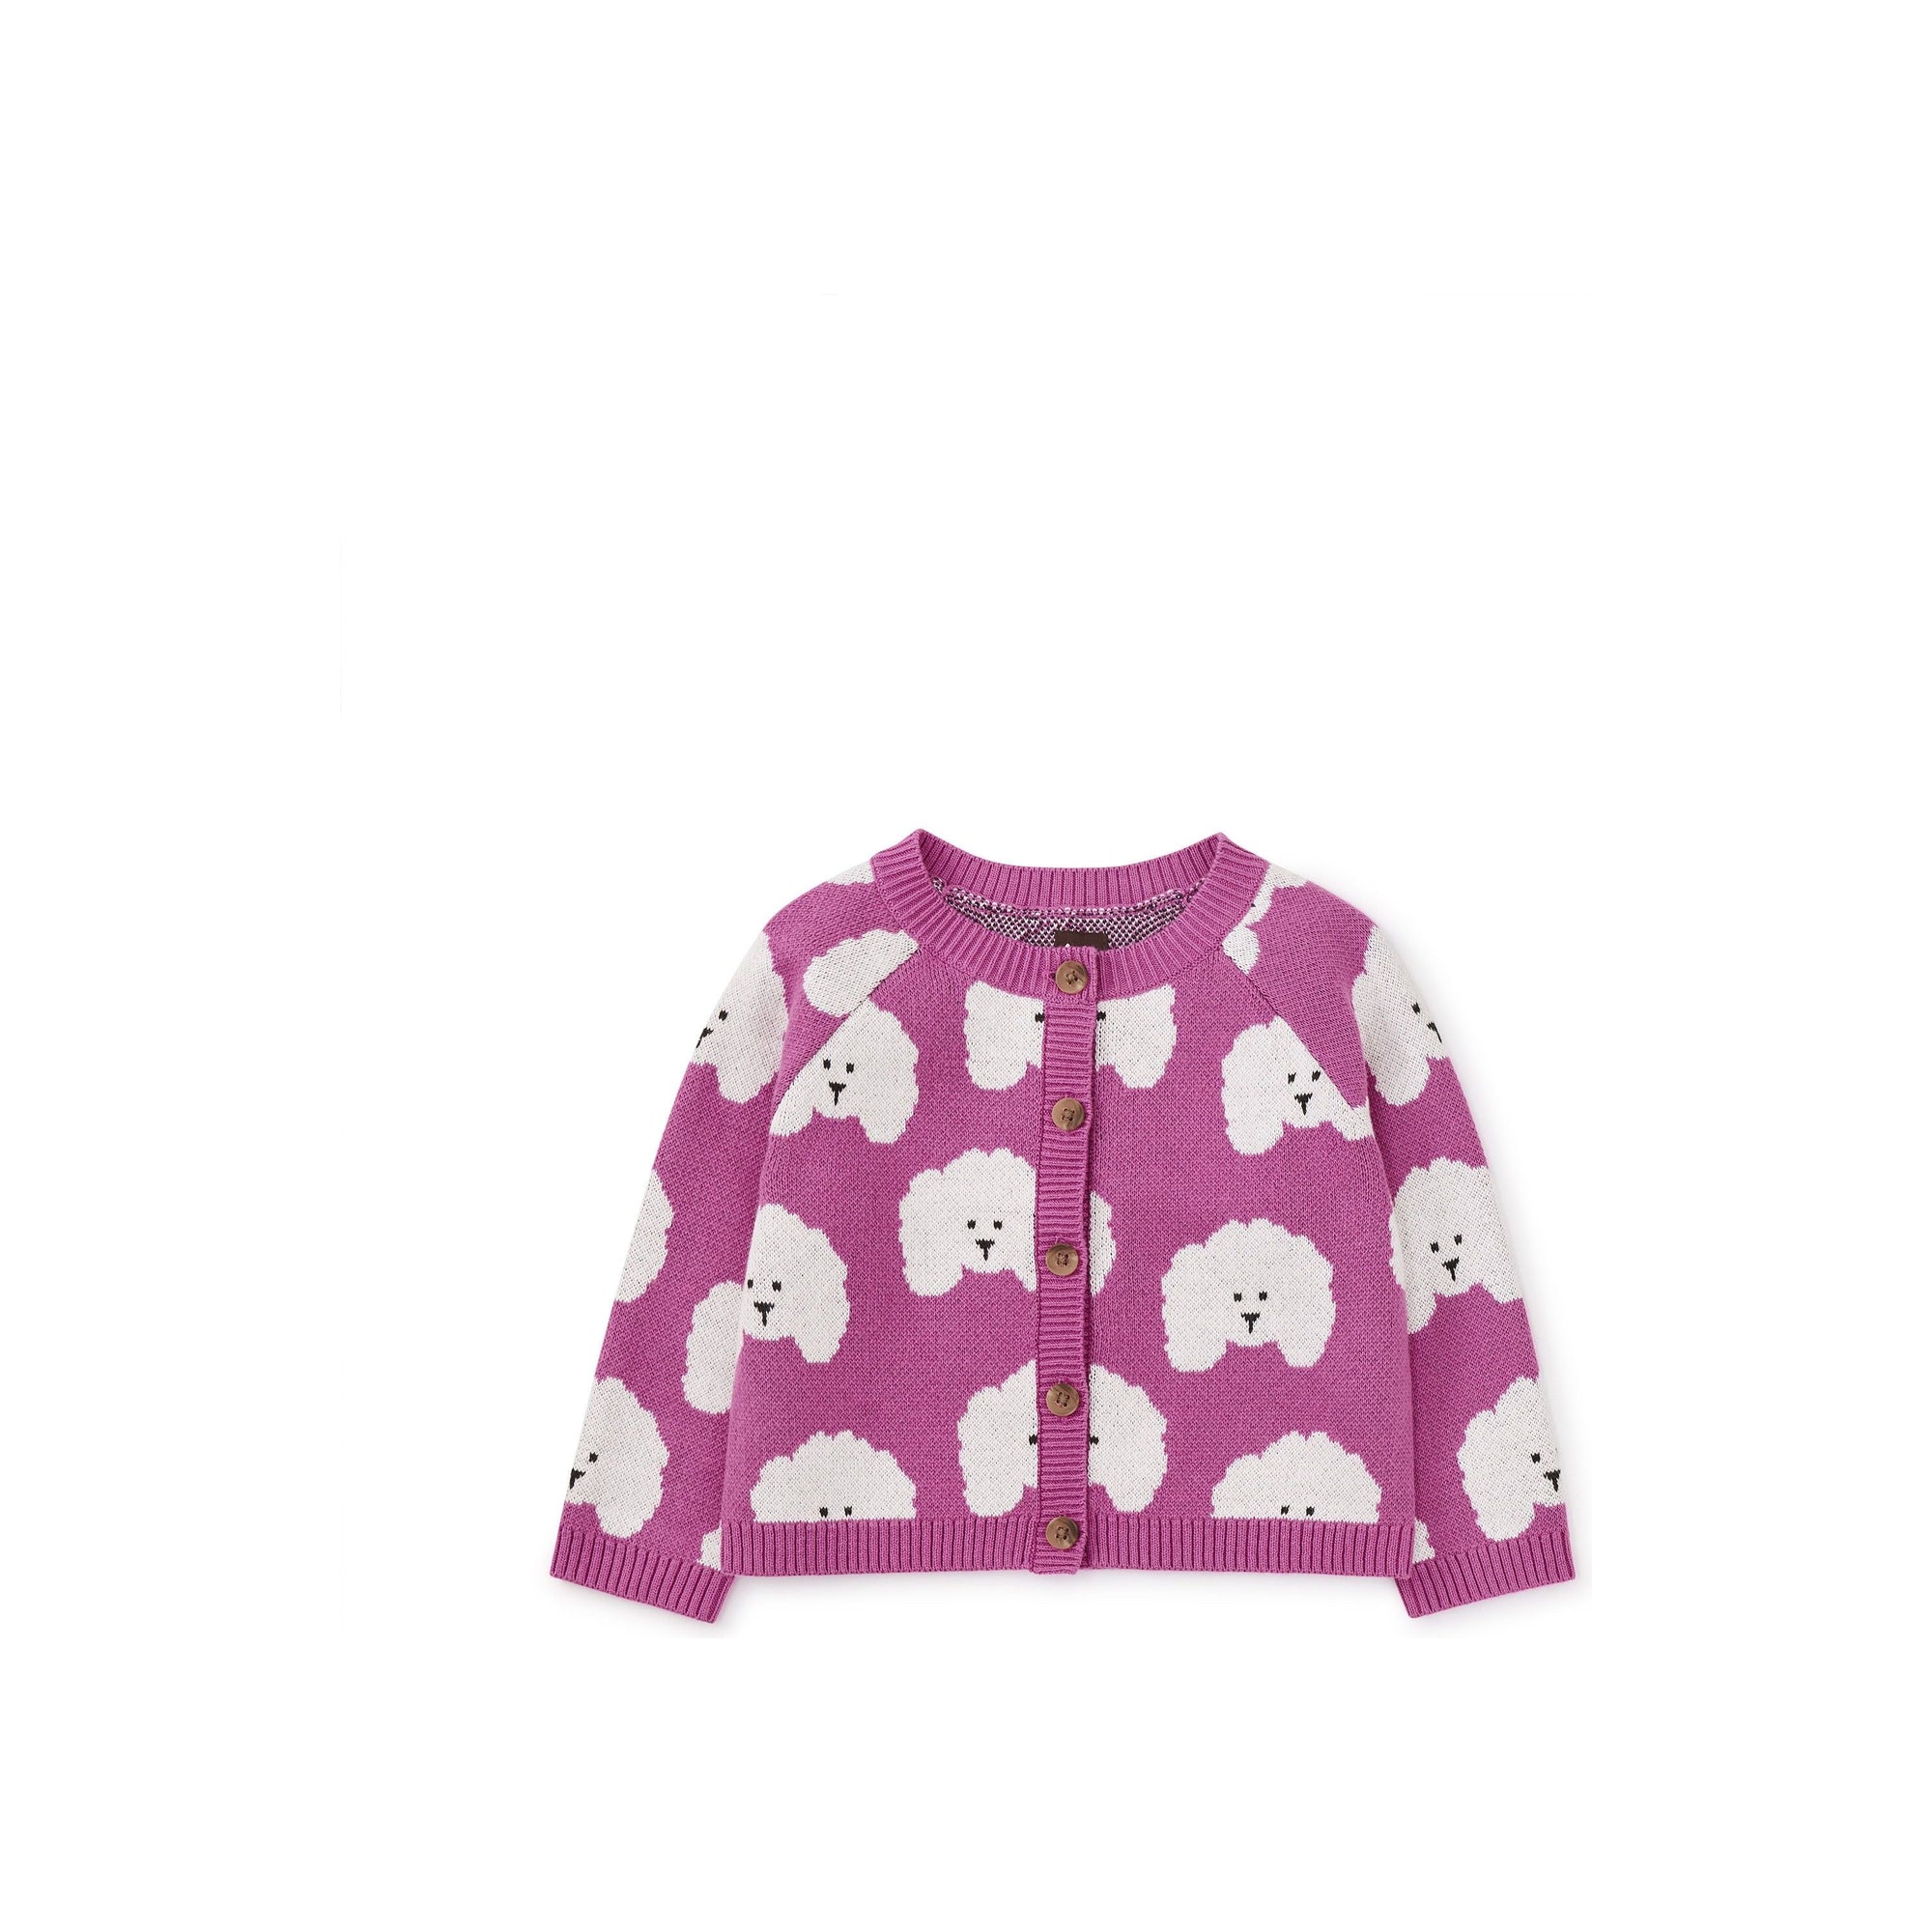 Iconic Baby Cardigan - Poodle Party